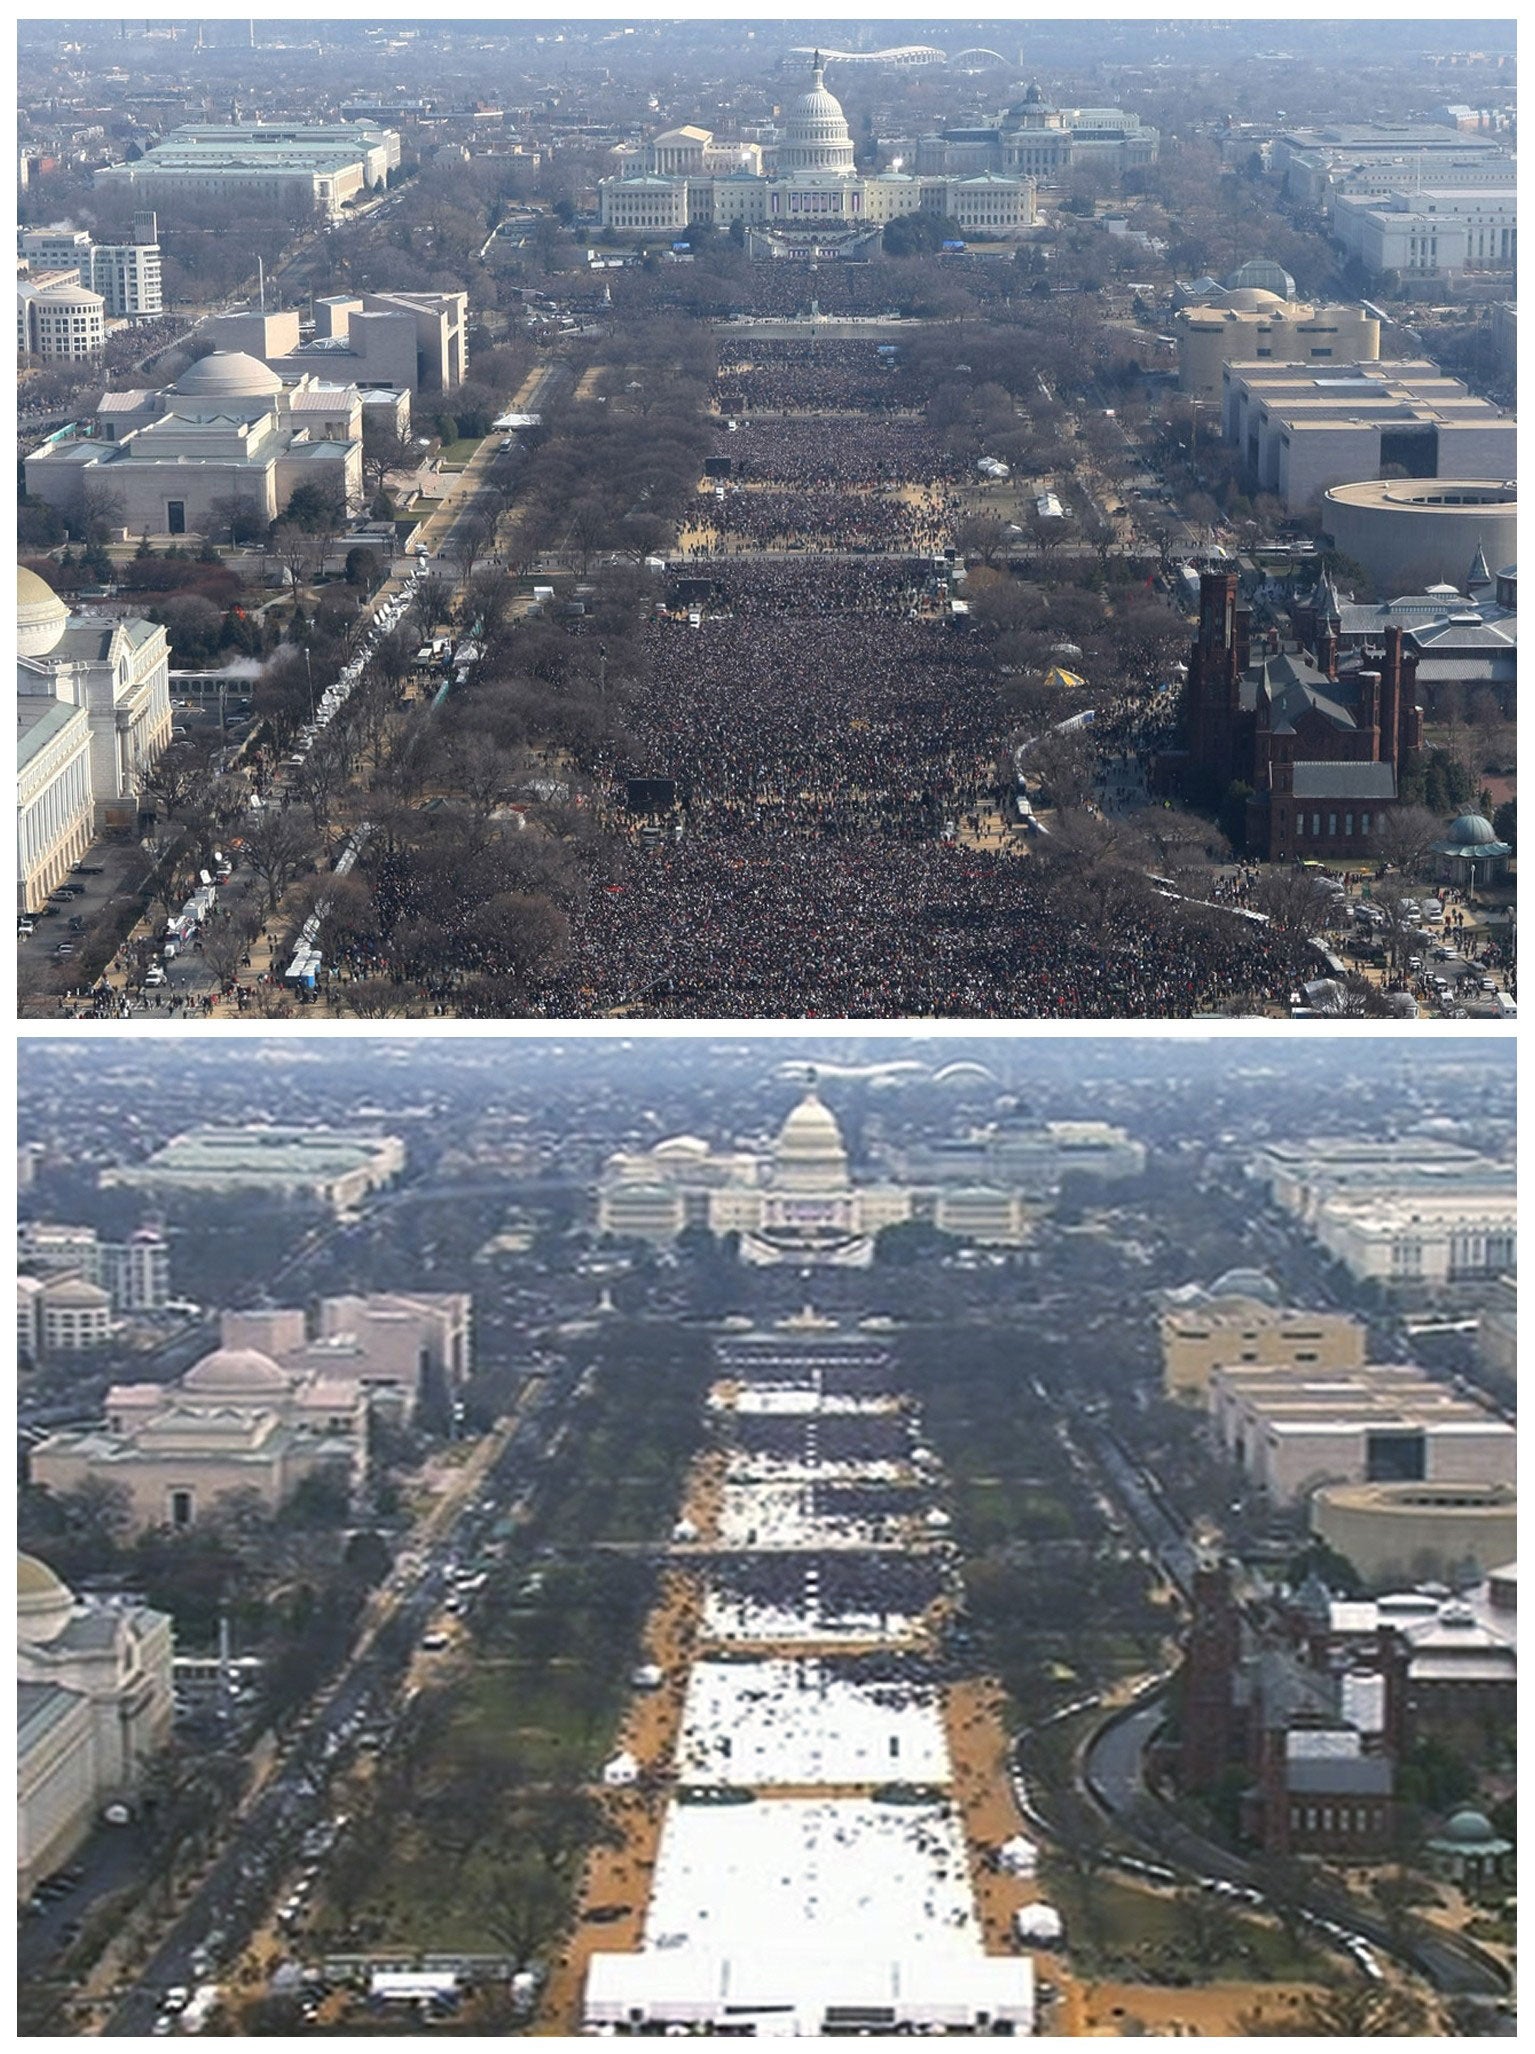 This pair of photos shows a view of the crowd on the National Mall at the inaugurations of President Barack Obama, above, on January 20, 2009, and President Donald Trump, below, on January 20, 2017. The photo above and the screengrab from video below were both shot shortly before noon from the top of the Washington Monument